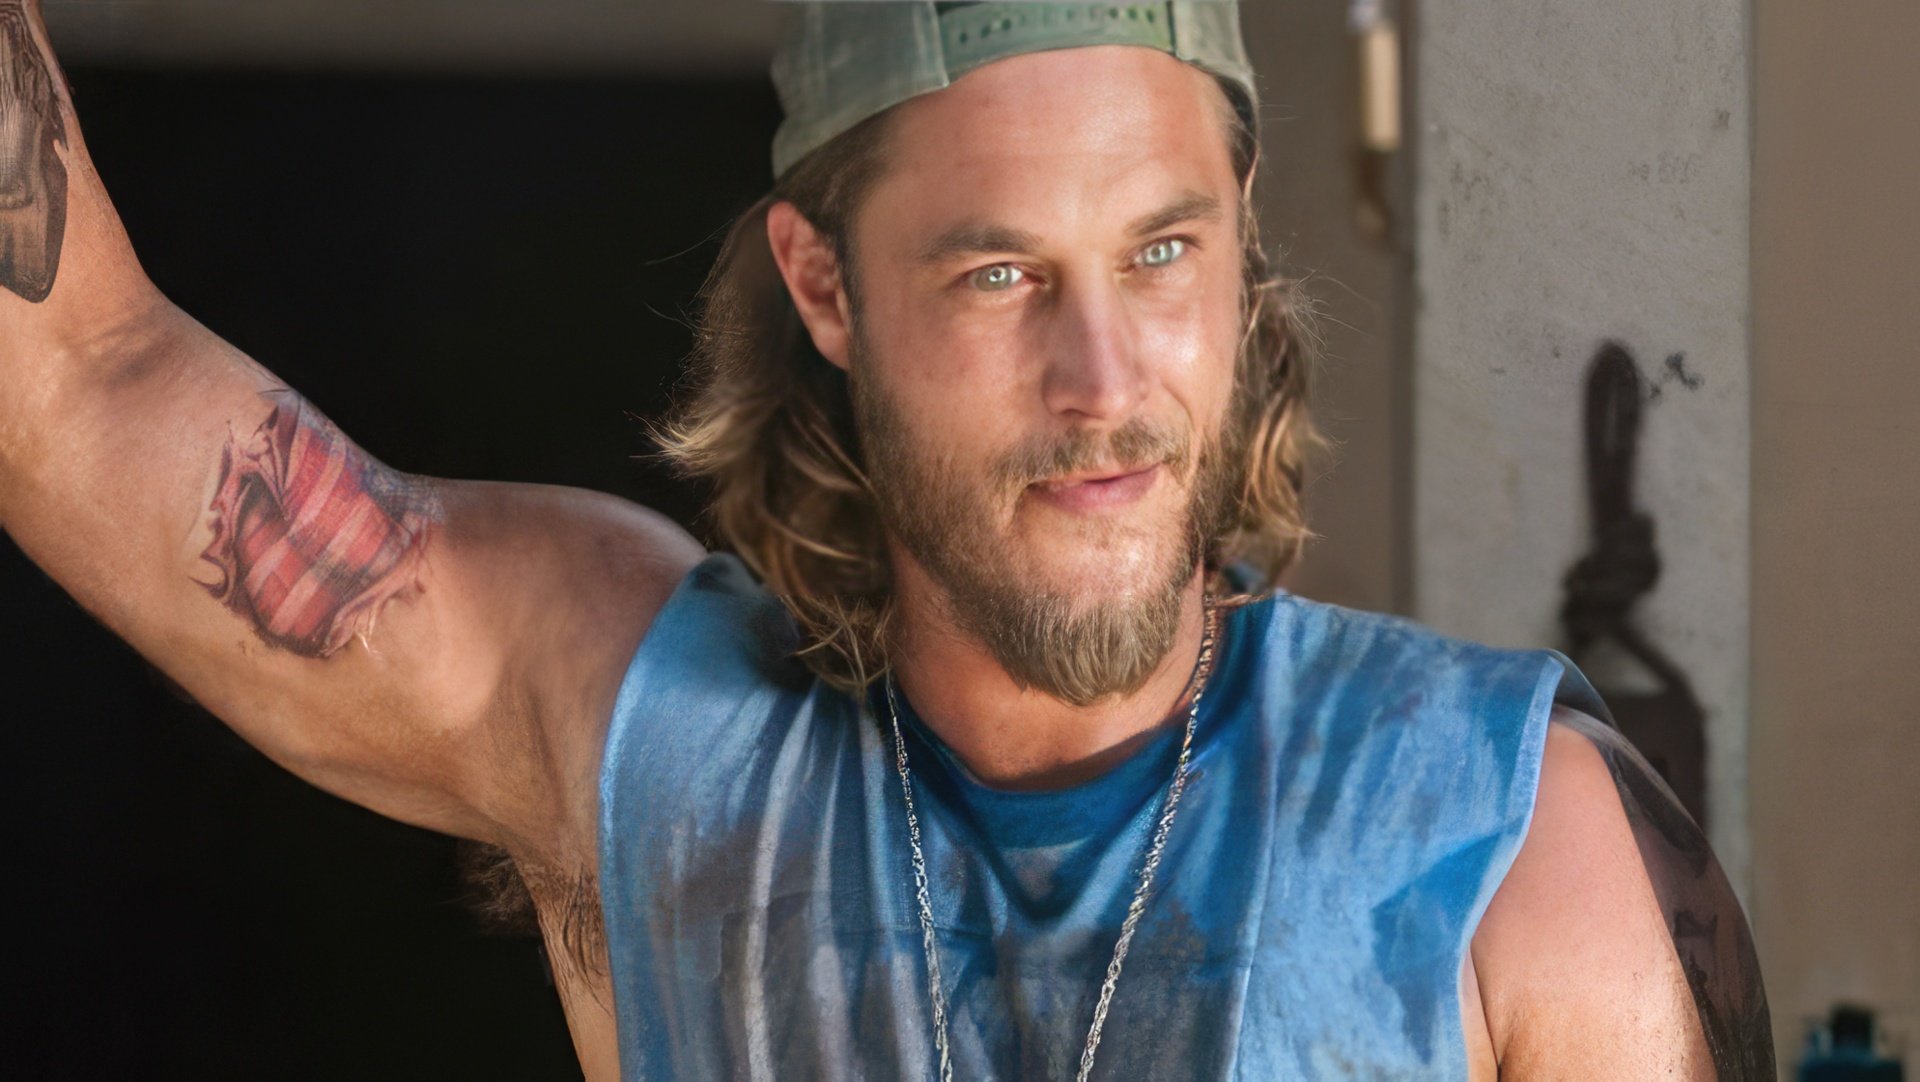 Travis Fimmel portraying redneck in The Baytown Outlaws